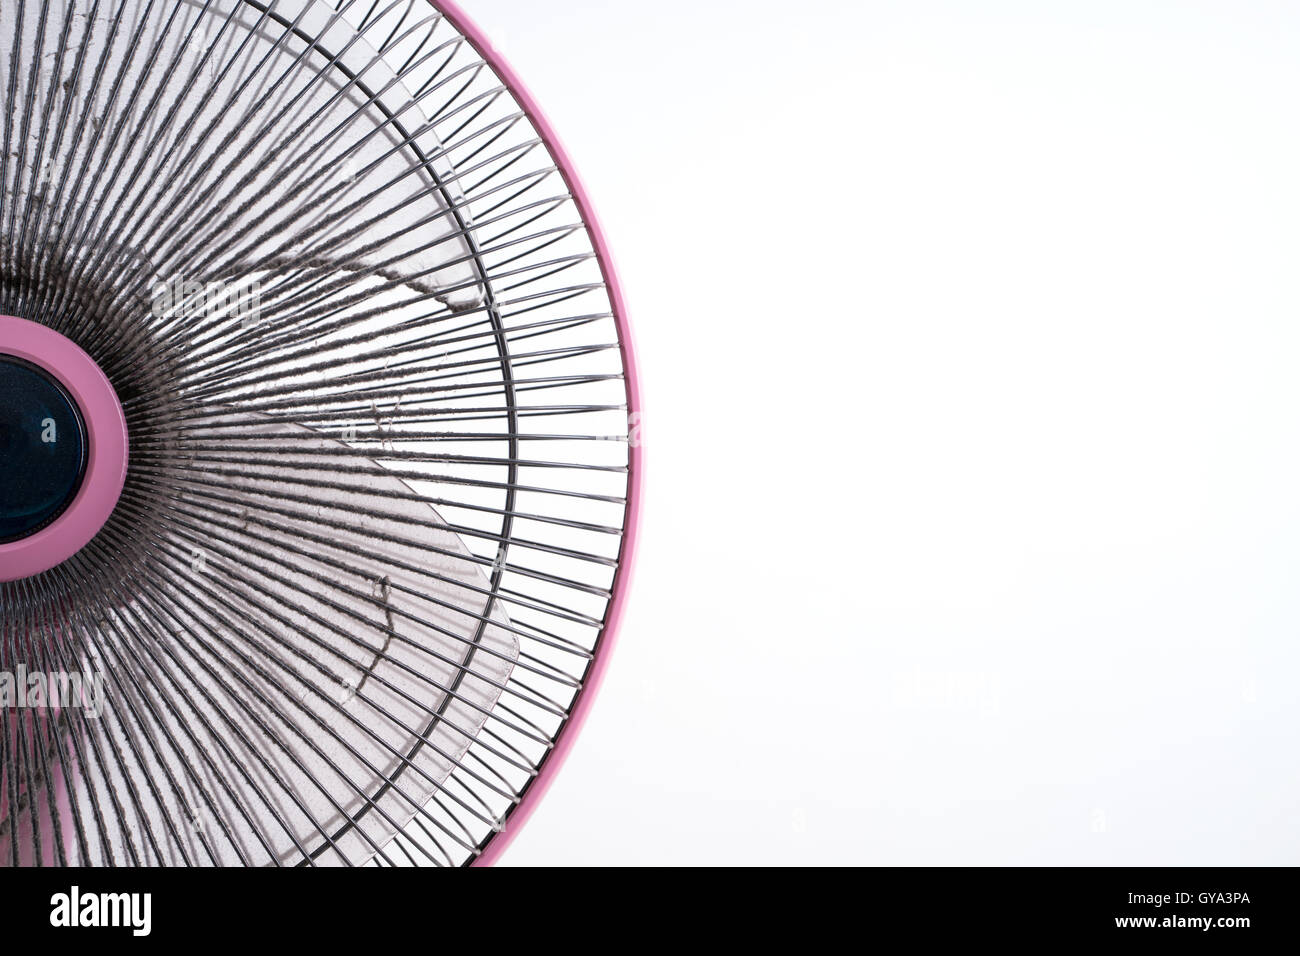 dirty electric fan cause of allergy on white background Stock Photo